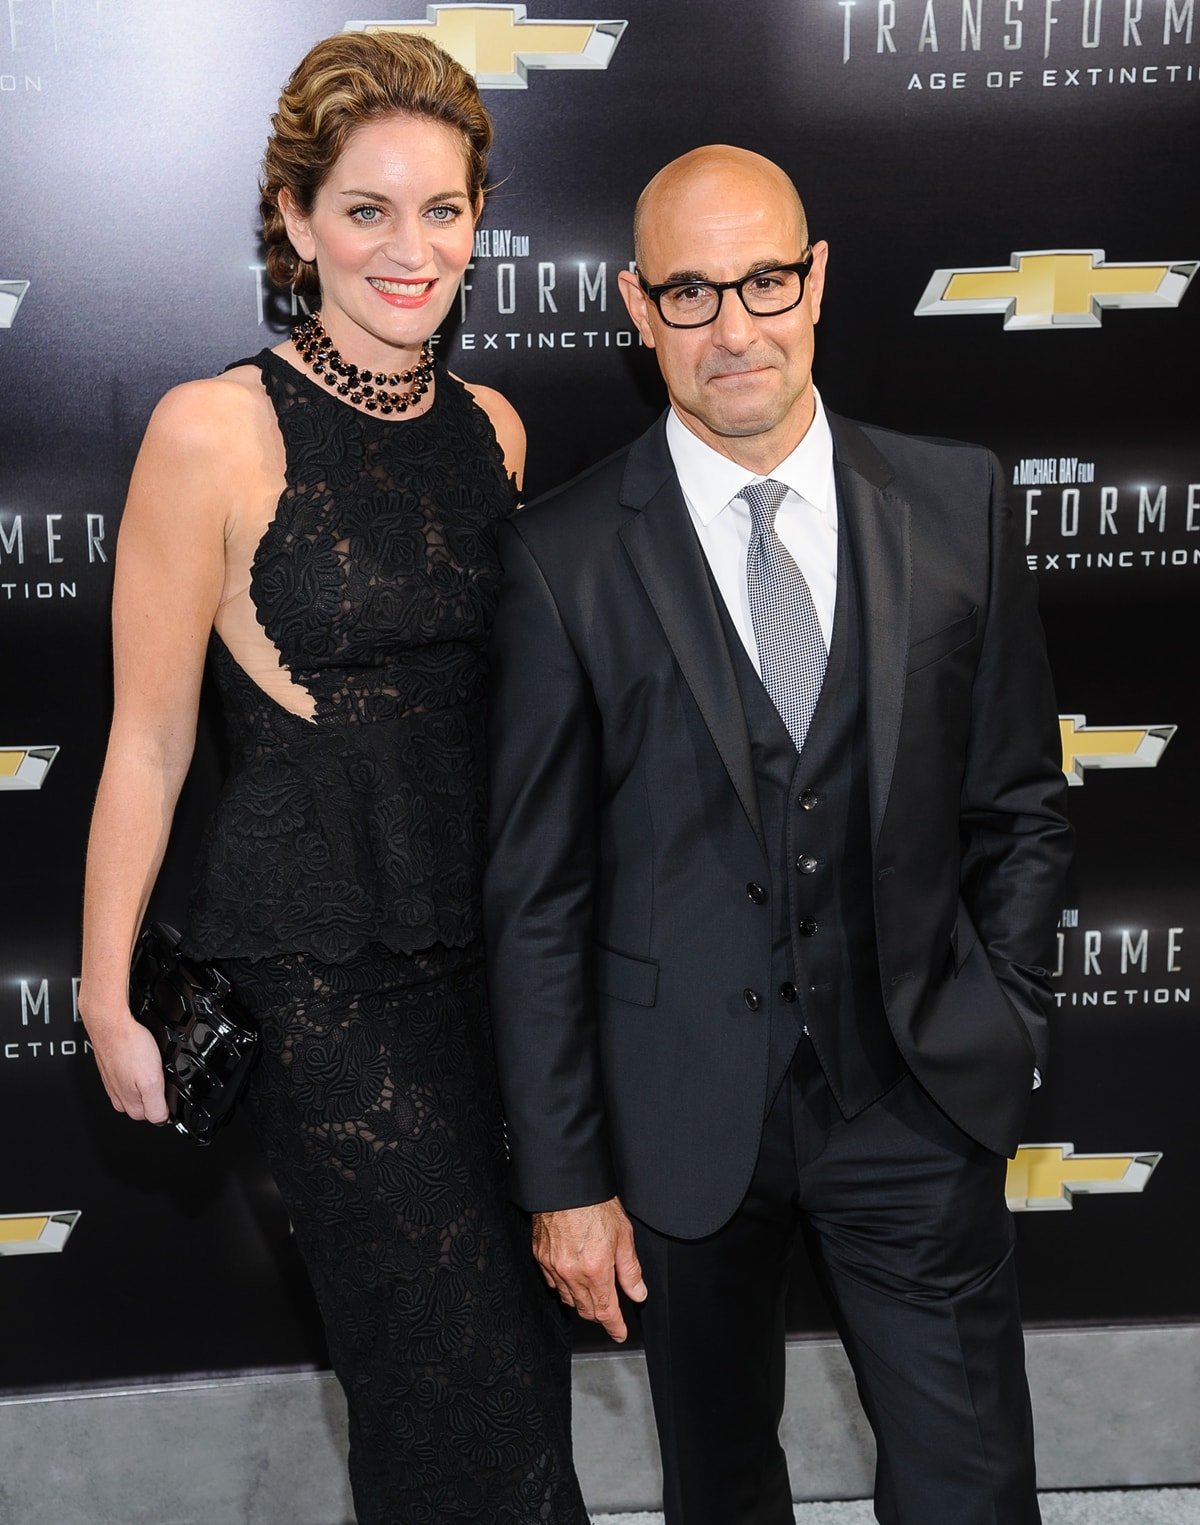 Stanley Tucci is much shorter and older than his wife Felicity Blunt